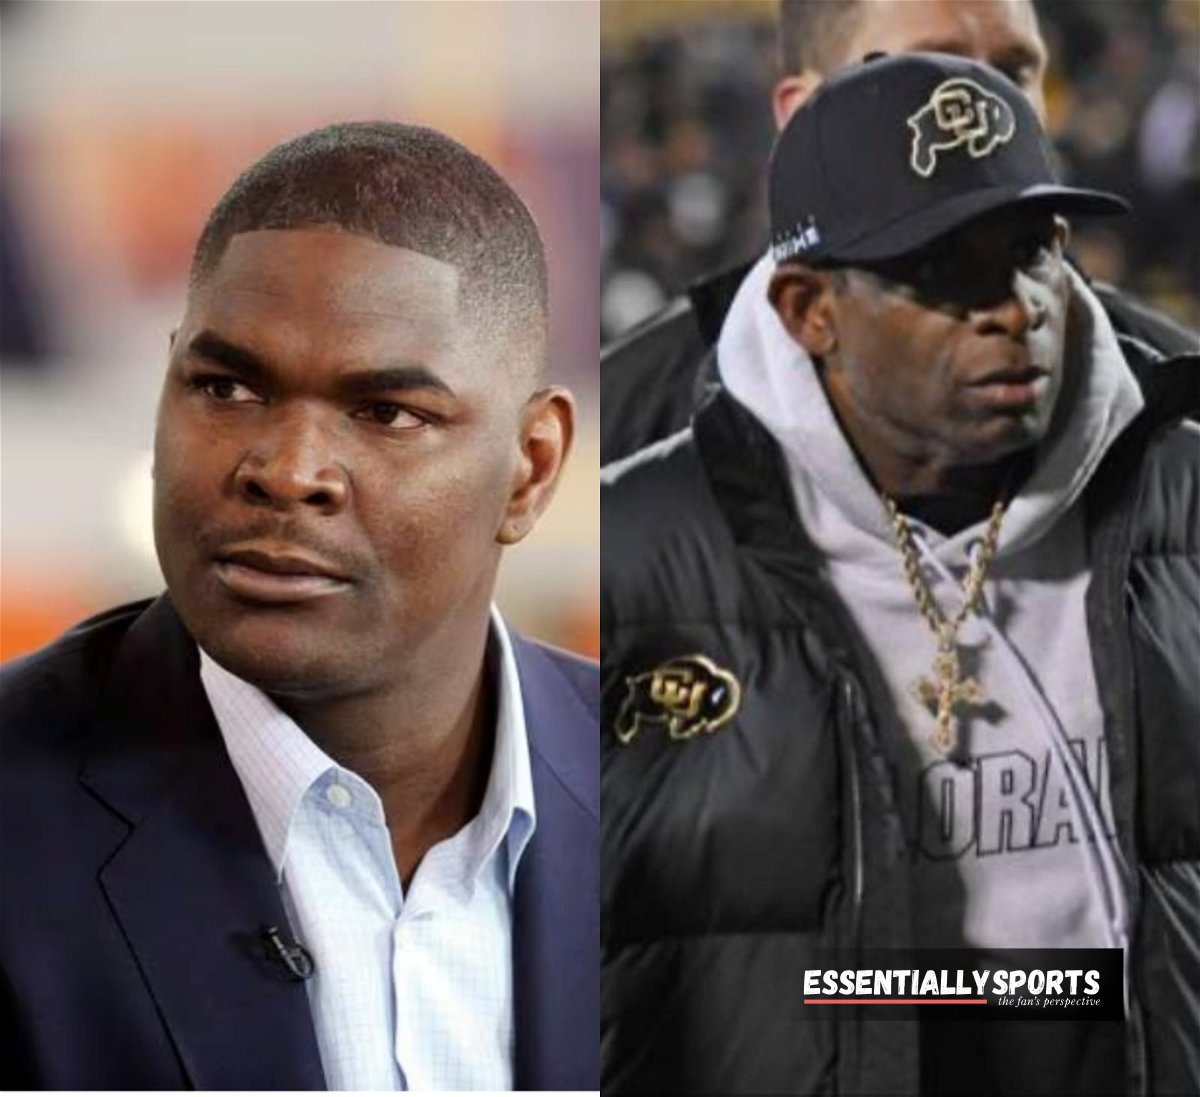 “This Is Why You Got Fired”: Fans Furious With Keyshawn Johnson’s Bold Prediction for Colorado, Accuse Him of Favoring Coach Prime